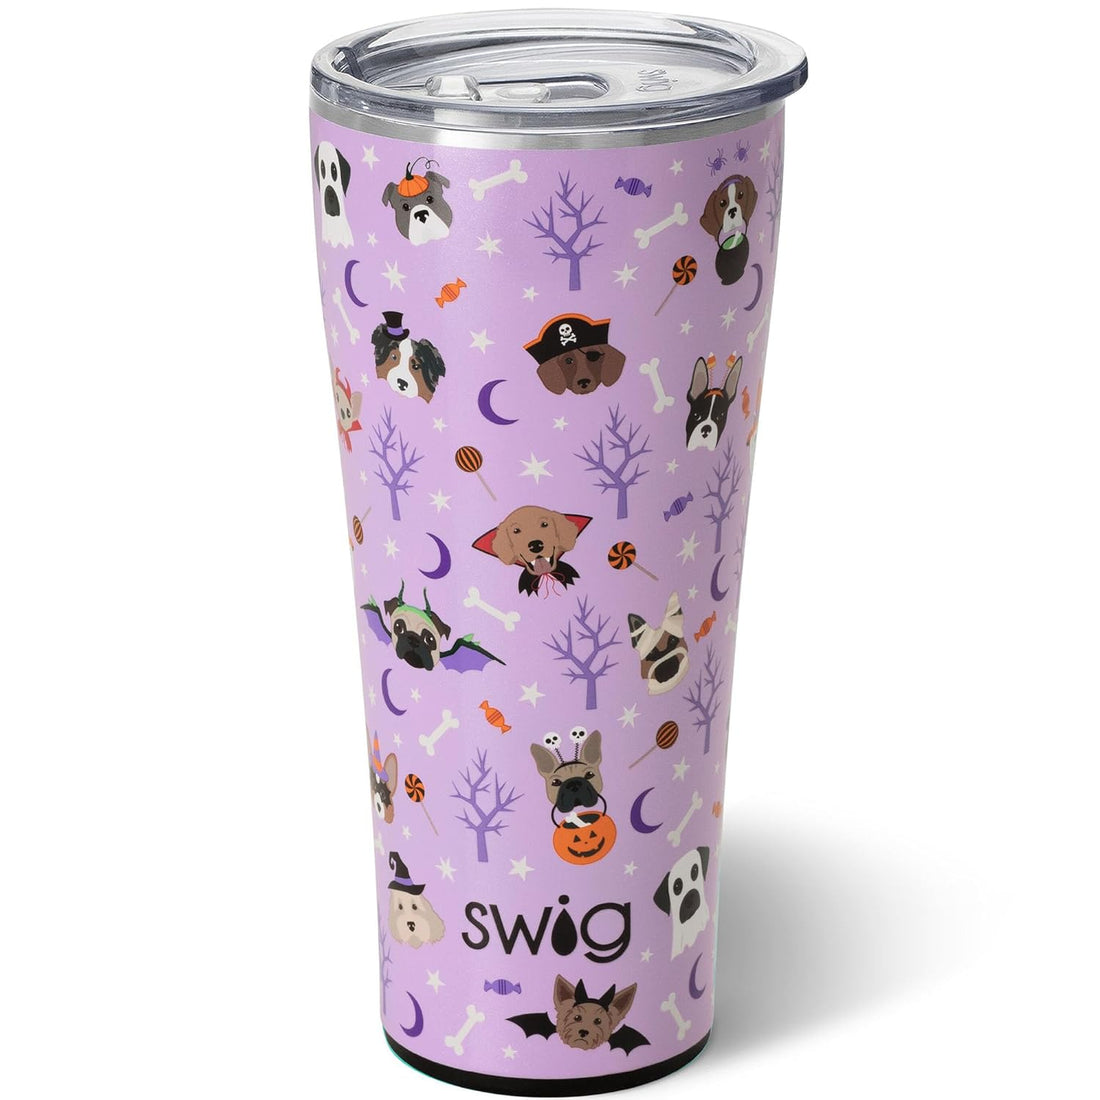 Swig Life XL 32oz Tumbler | Discontinued Prints | Insulated Coffee Tumbler with Lid, Cup Holder Friendly, Dishwasher Safe, Stainless Steel, Extra Large Travel Mugs (Howl-o-ween)